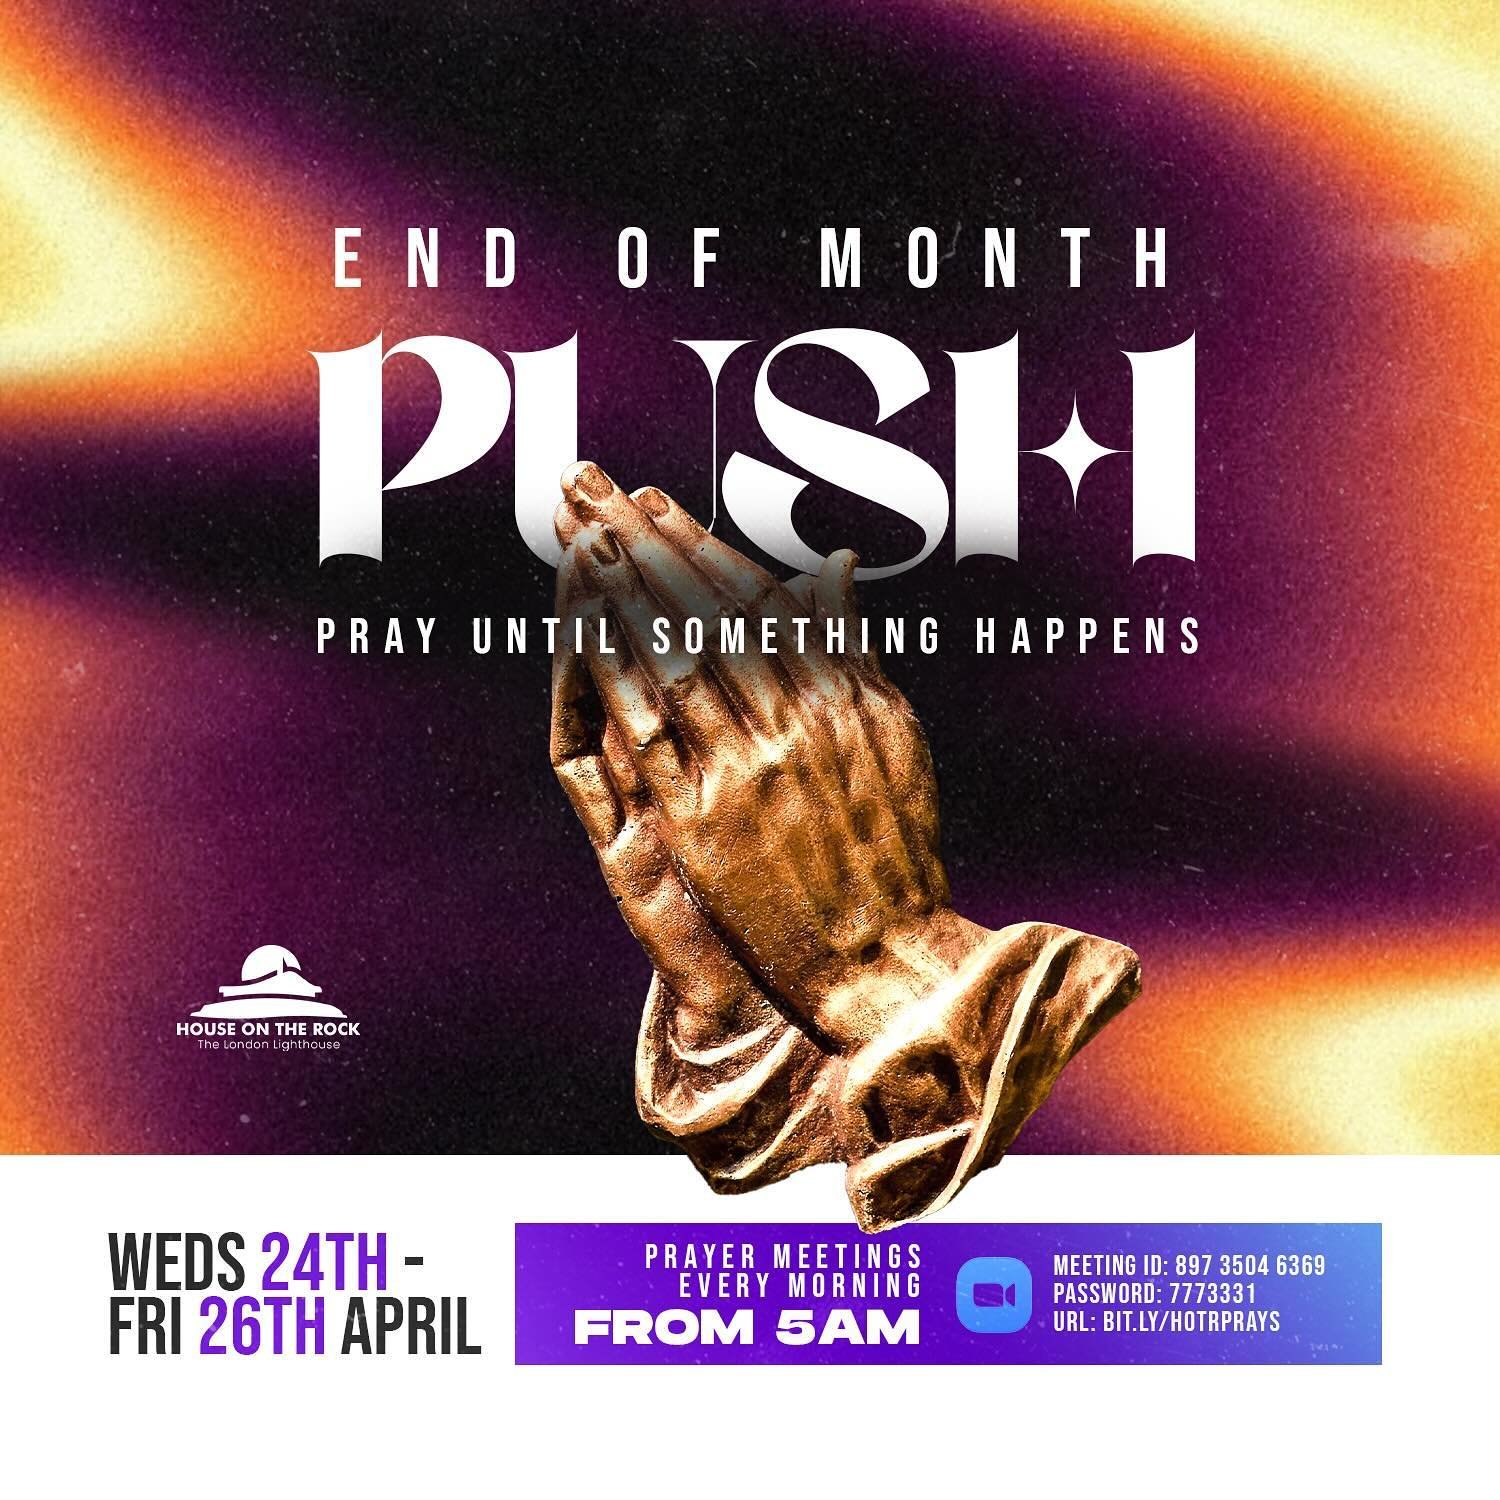 Are You ready to P.U.S.H?????
We are PRAYING &amp; FASTING in our End Of Month PUSH, where we Pray Until Something Happens. 
Starts tomorrow (Link in Bio for Prayer Points Bulletin)

Join us as we do not depart from the commandment of His lips; and a